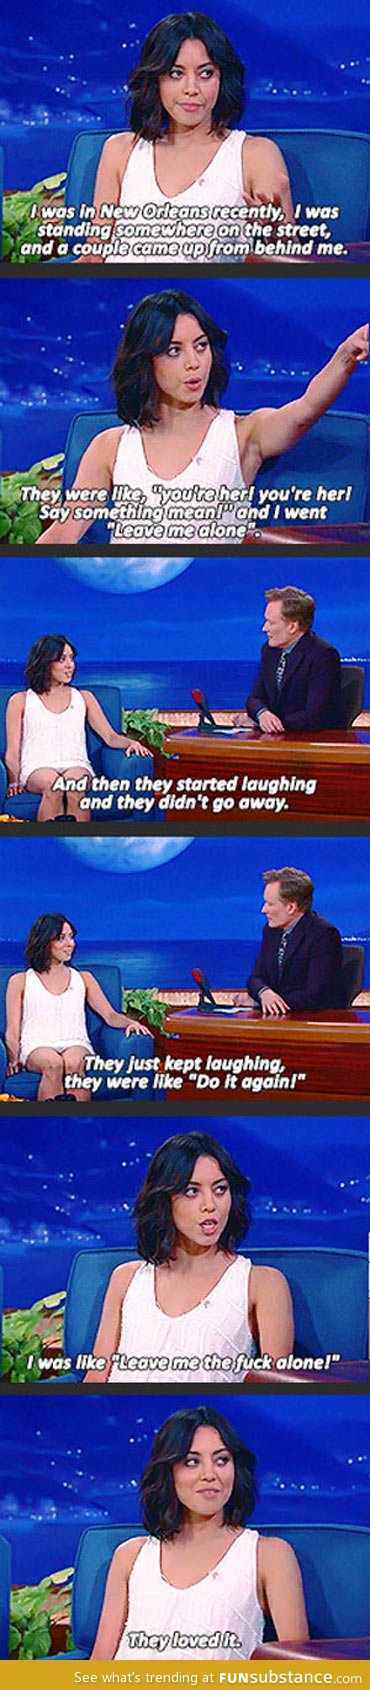 Further proof that aubrey plaza is awesome